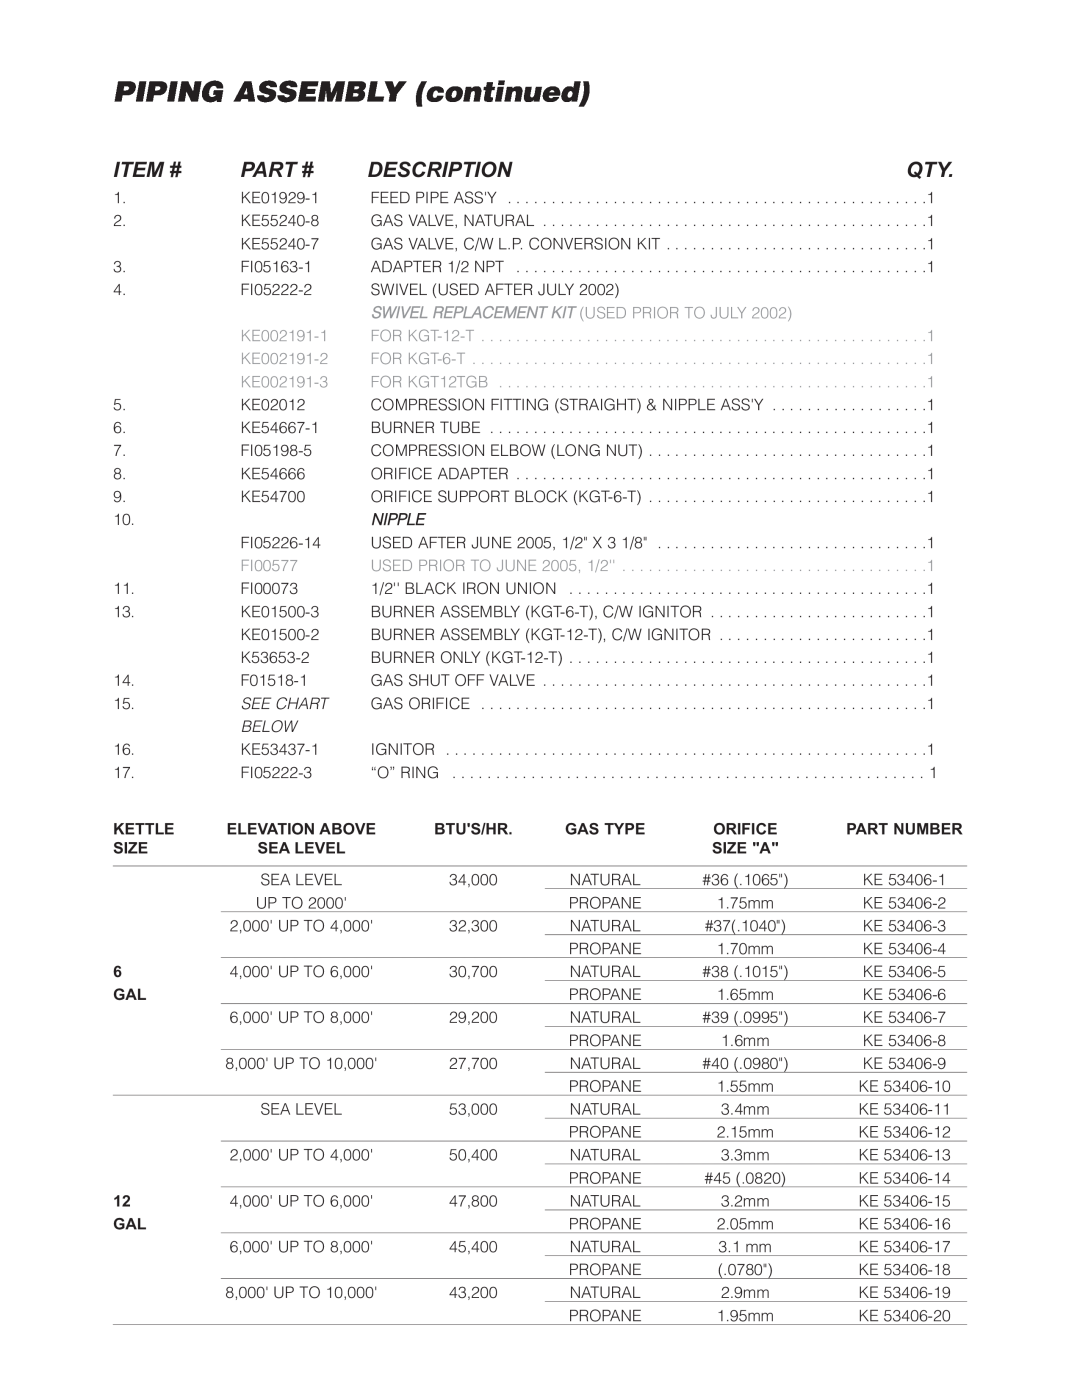 Cleveland Range KGT-6-T PIPING ASSEMBLY continued, Item #, Part #, Description, Nipple, See Chart, Below, Kettle, Btus/Hr 